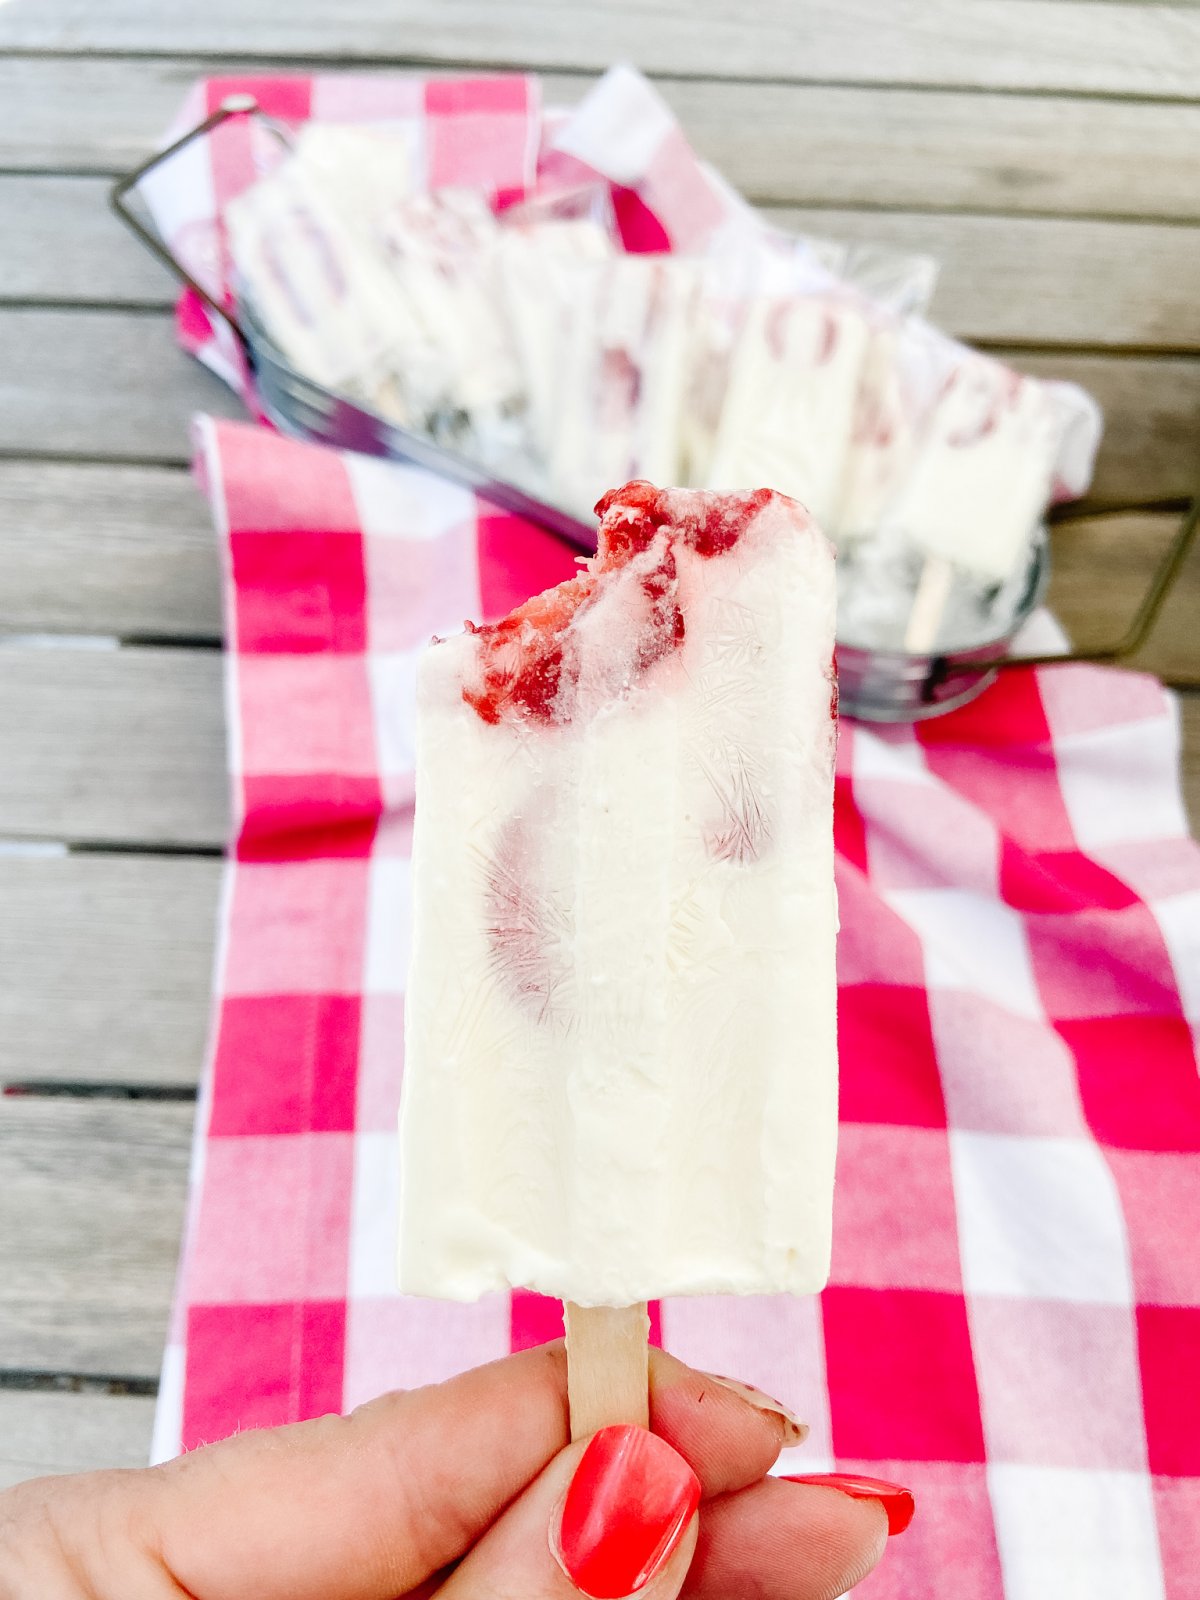 3-Ingredient strawberry Creamsicle Popsicles. The easiest and BEST low-carb strawberry popsicles taste like summer with just 3.5 net carbs per serving! 